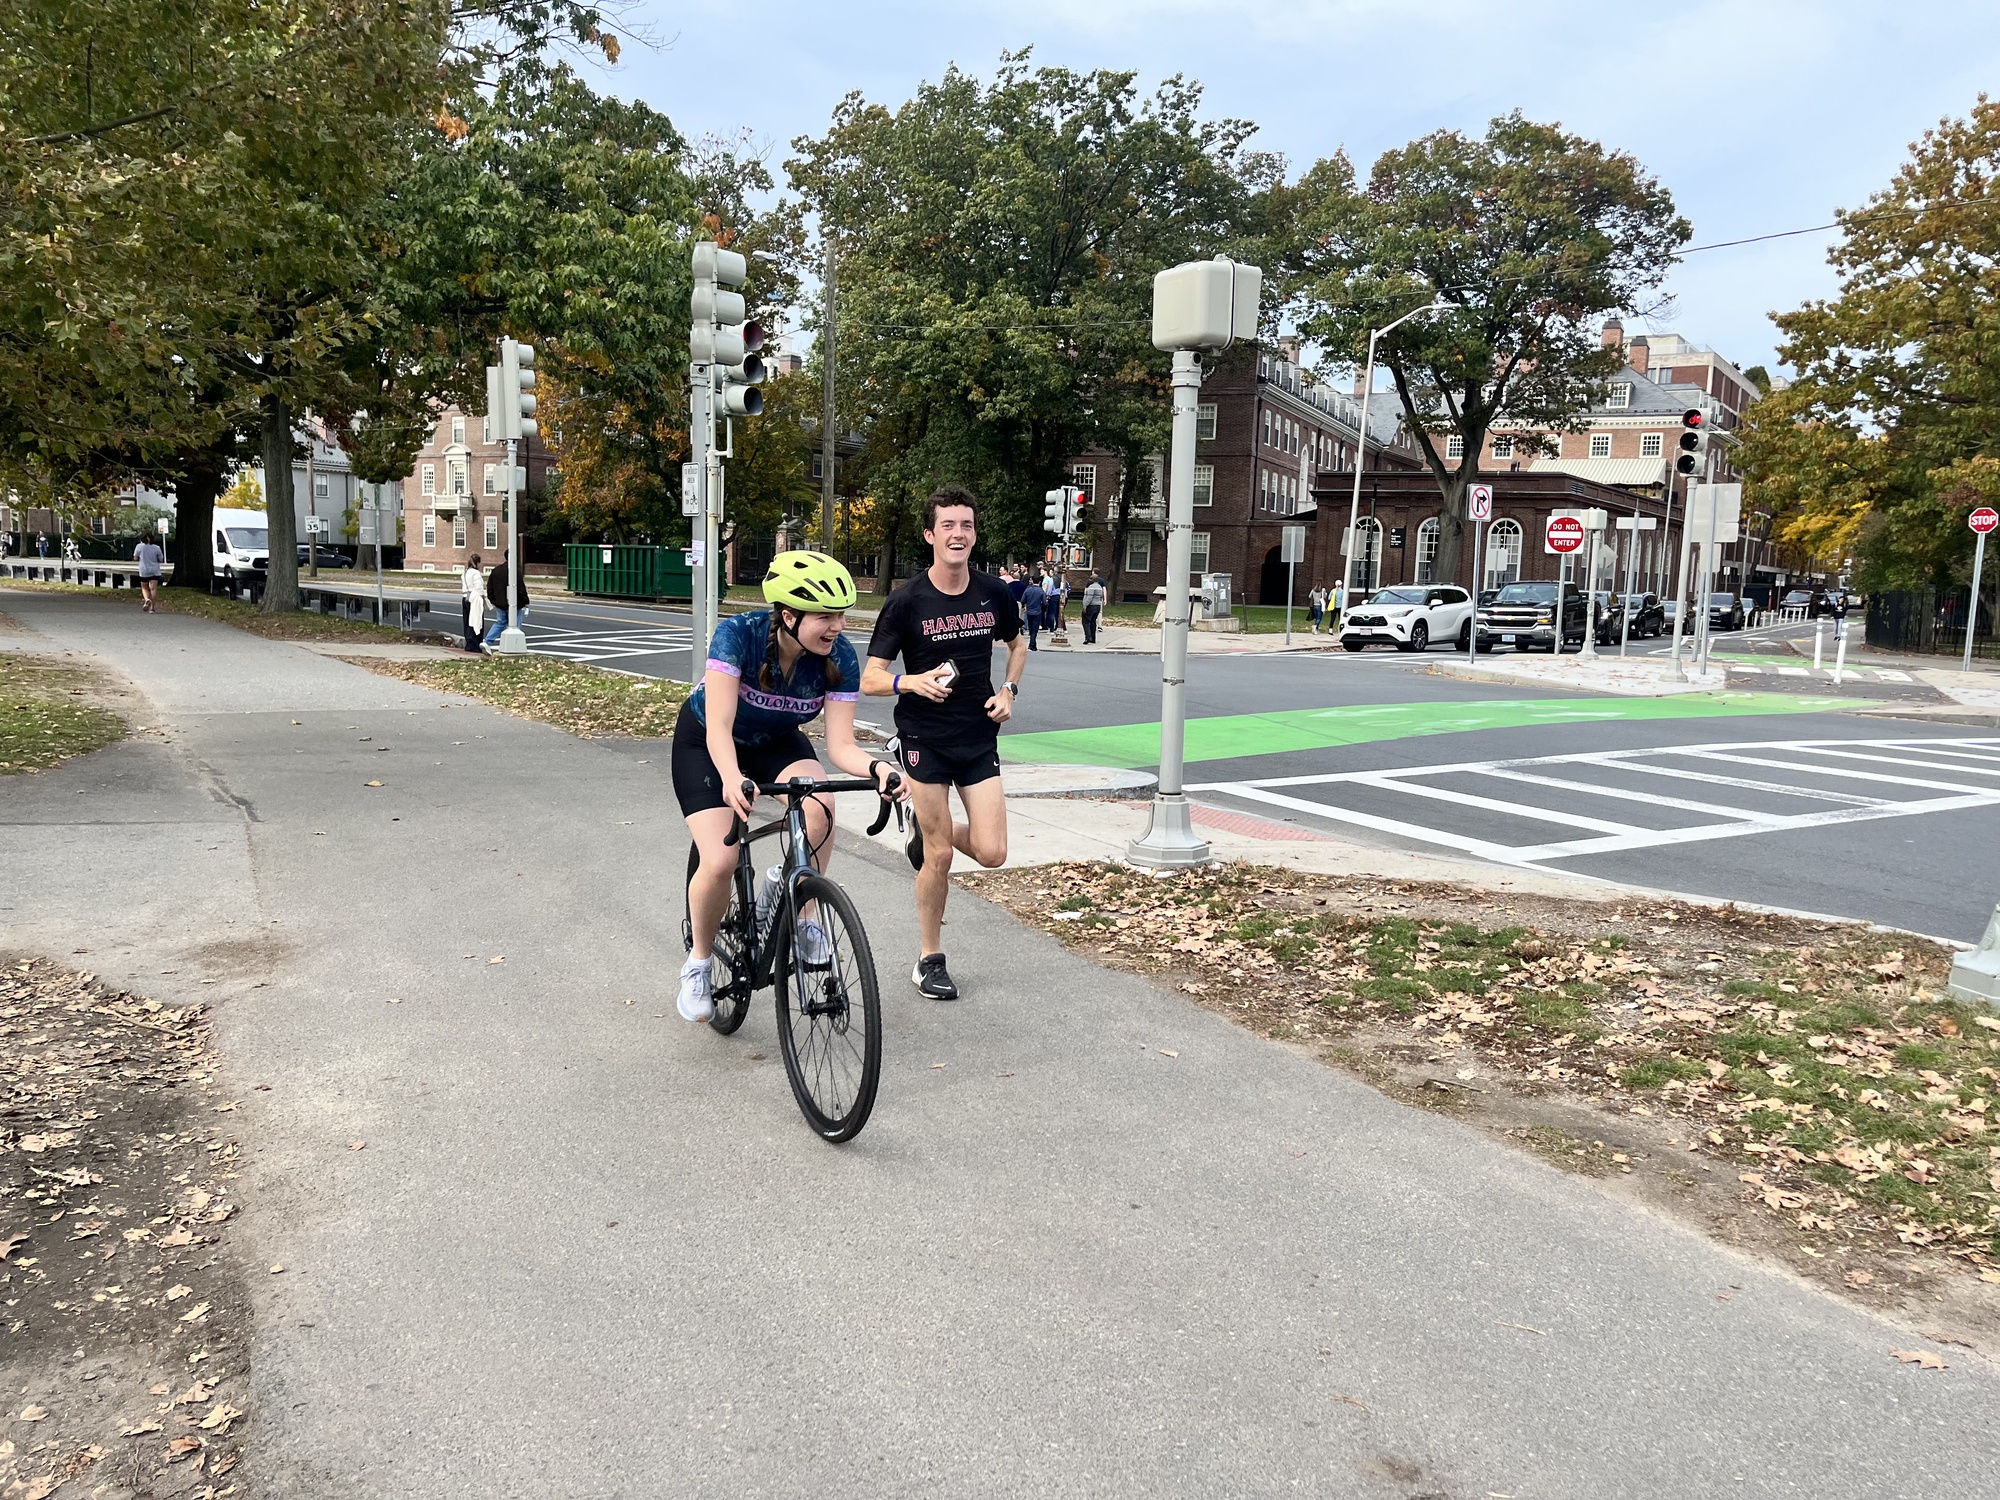 Blanks on a run with the writer biking beside him at a cool 7 minute-per-mile pace.